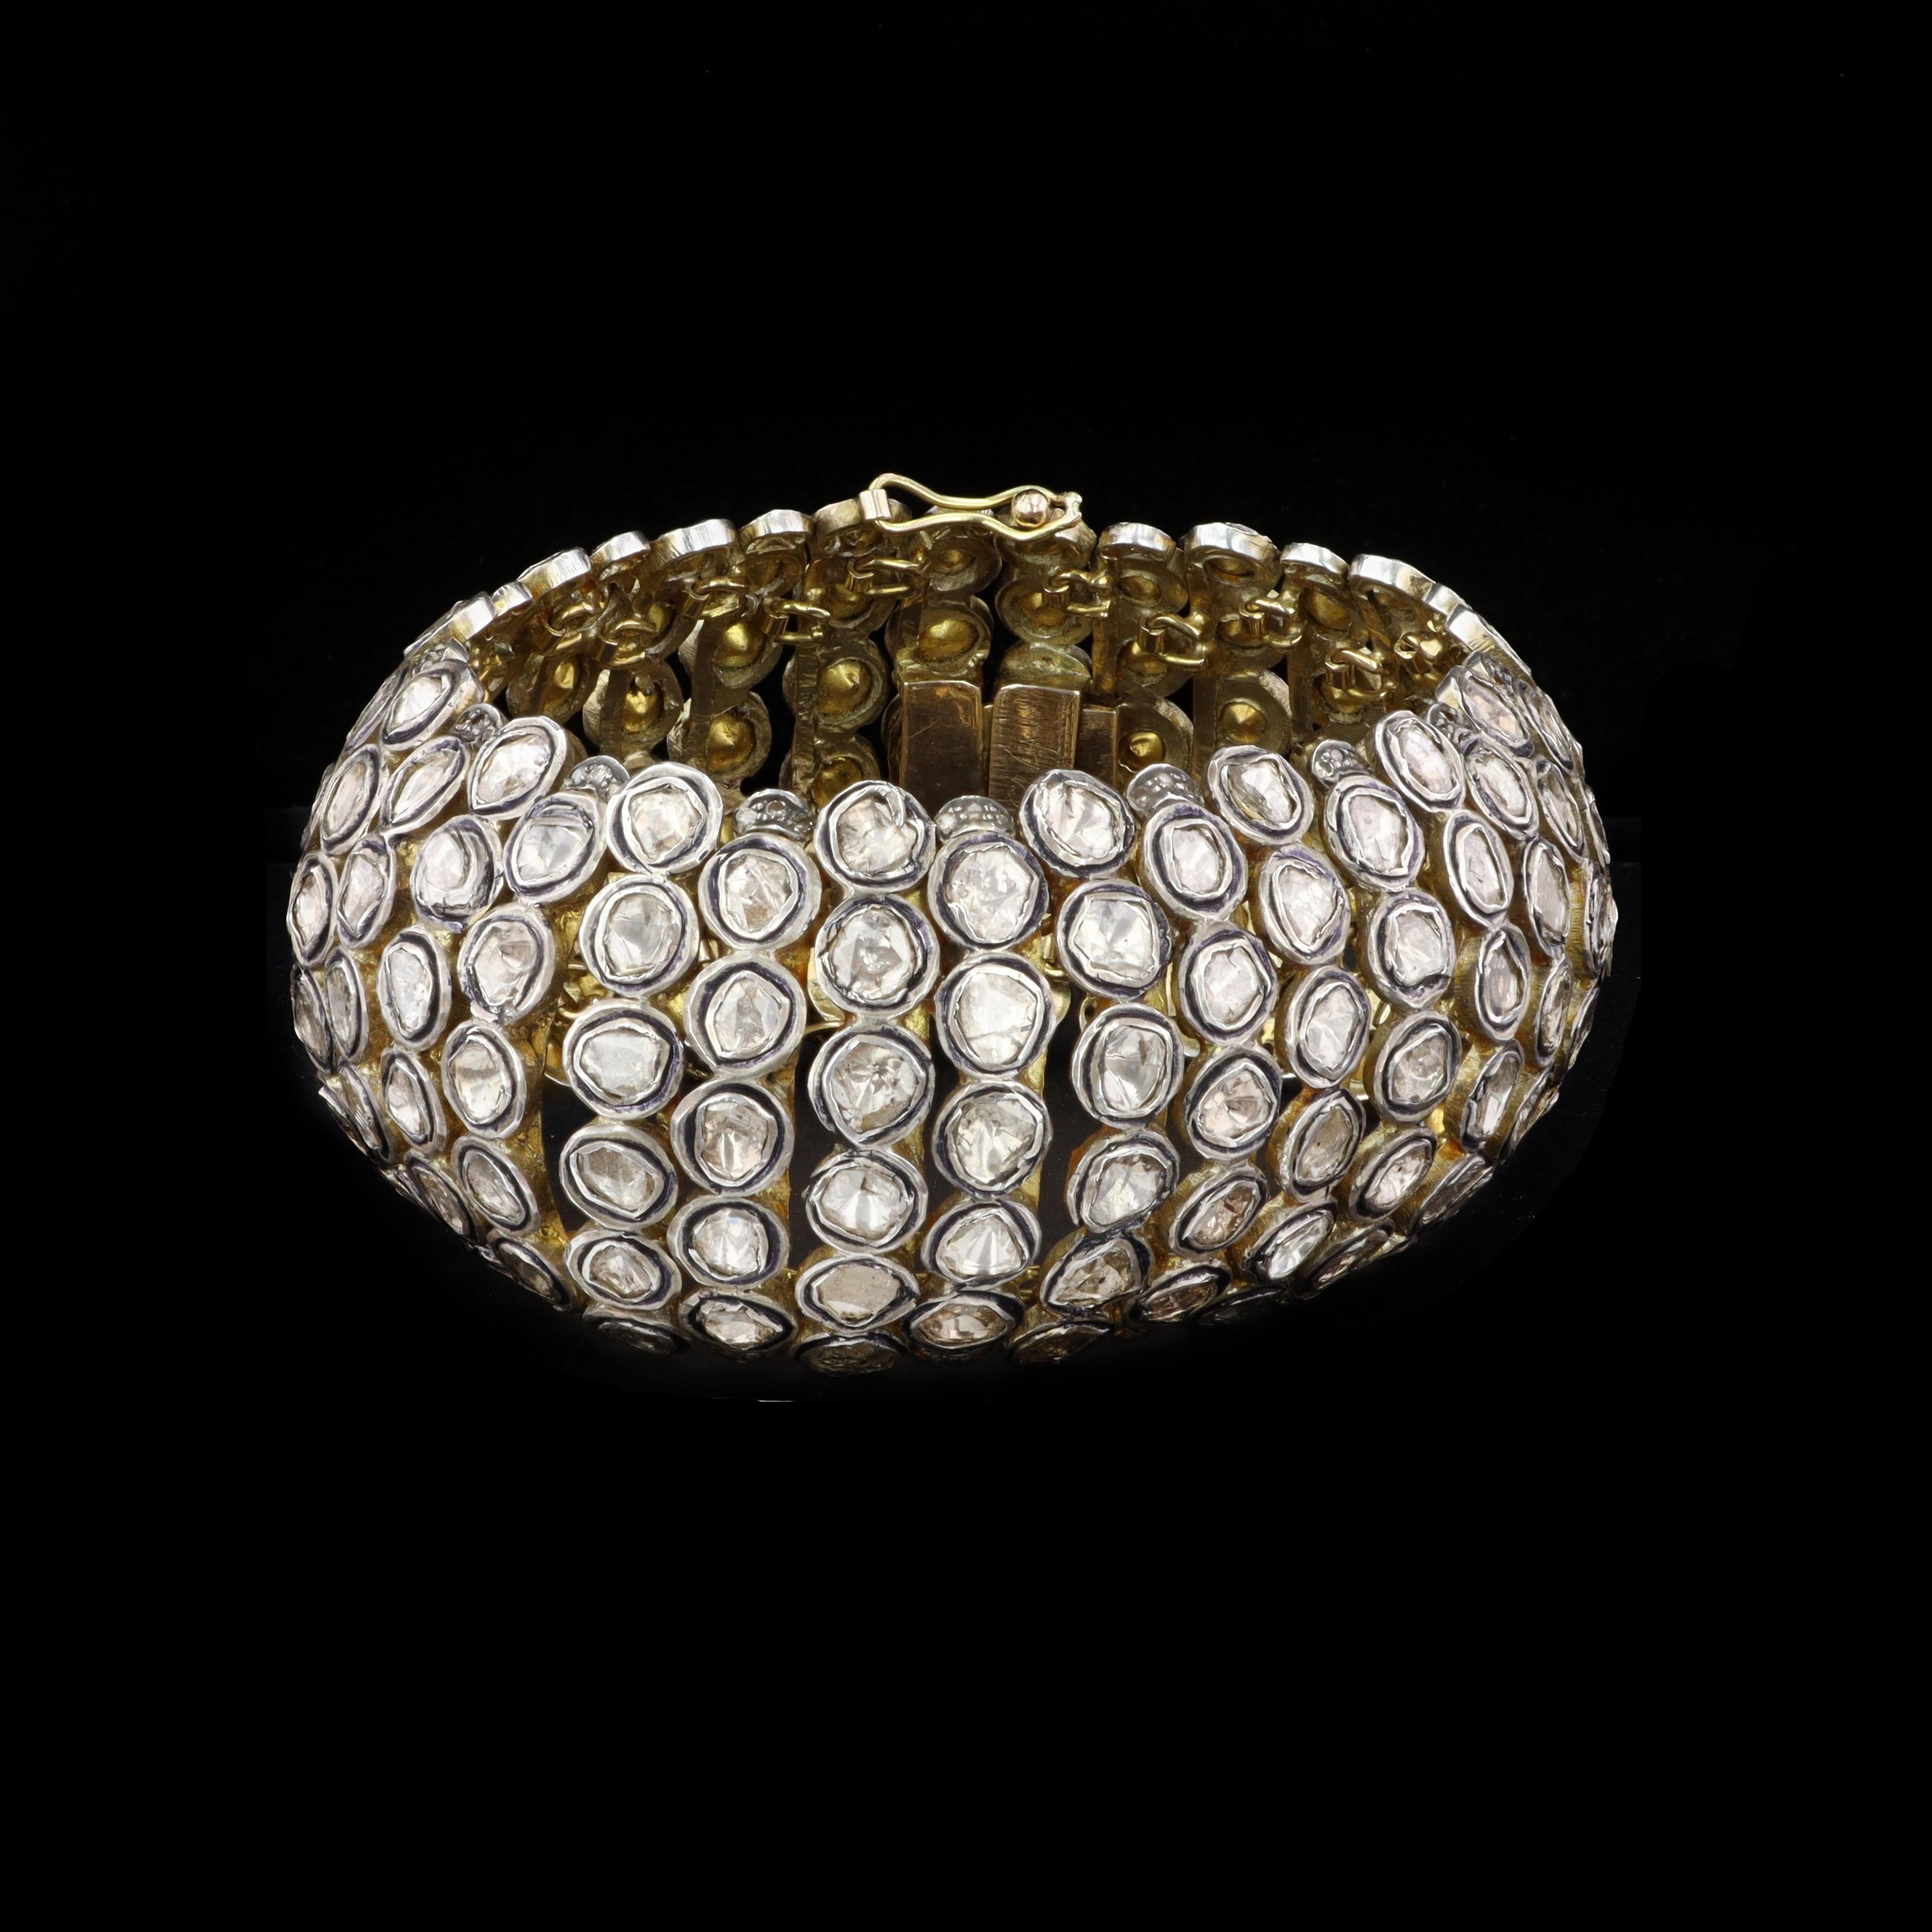 A unique and dazzling estate bracelet, this 14k yellow gold and silver 6 line diamond bracelet contains 21.67 carats of diamonds.

Length: 7.5 in
Width: 1.5 in